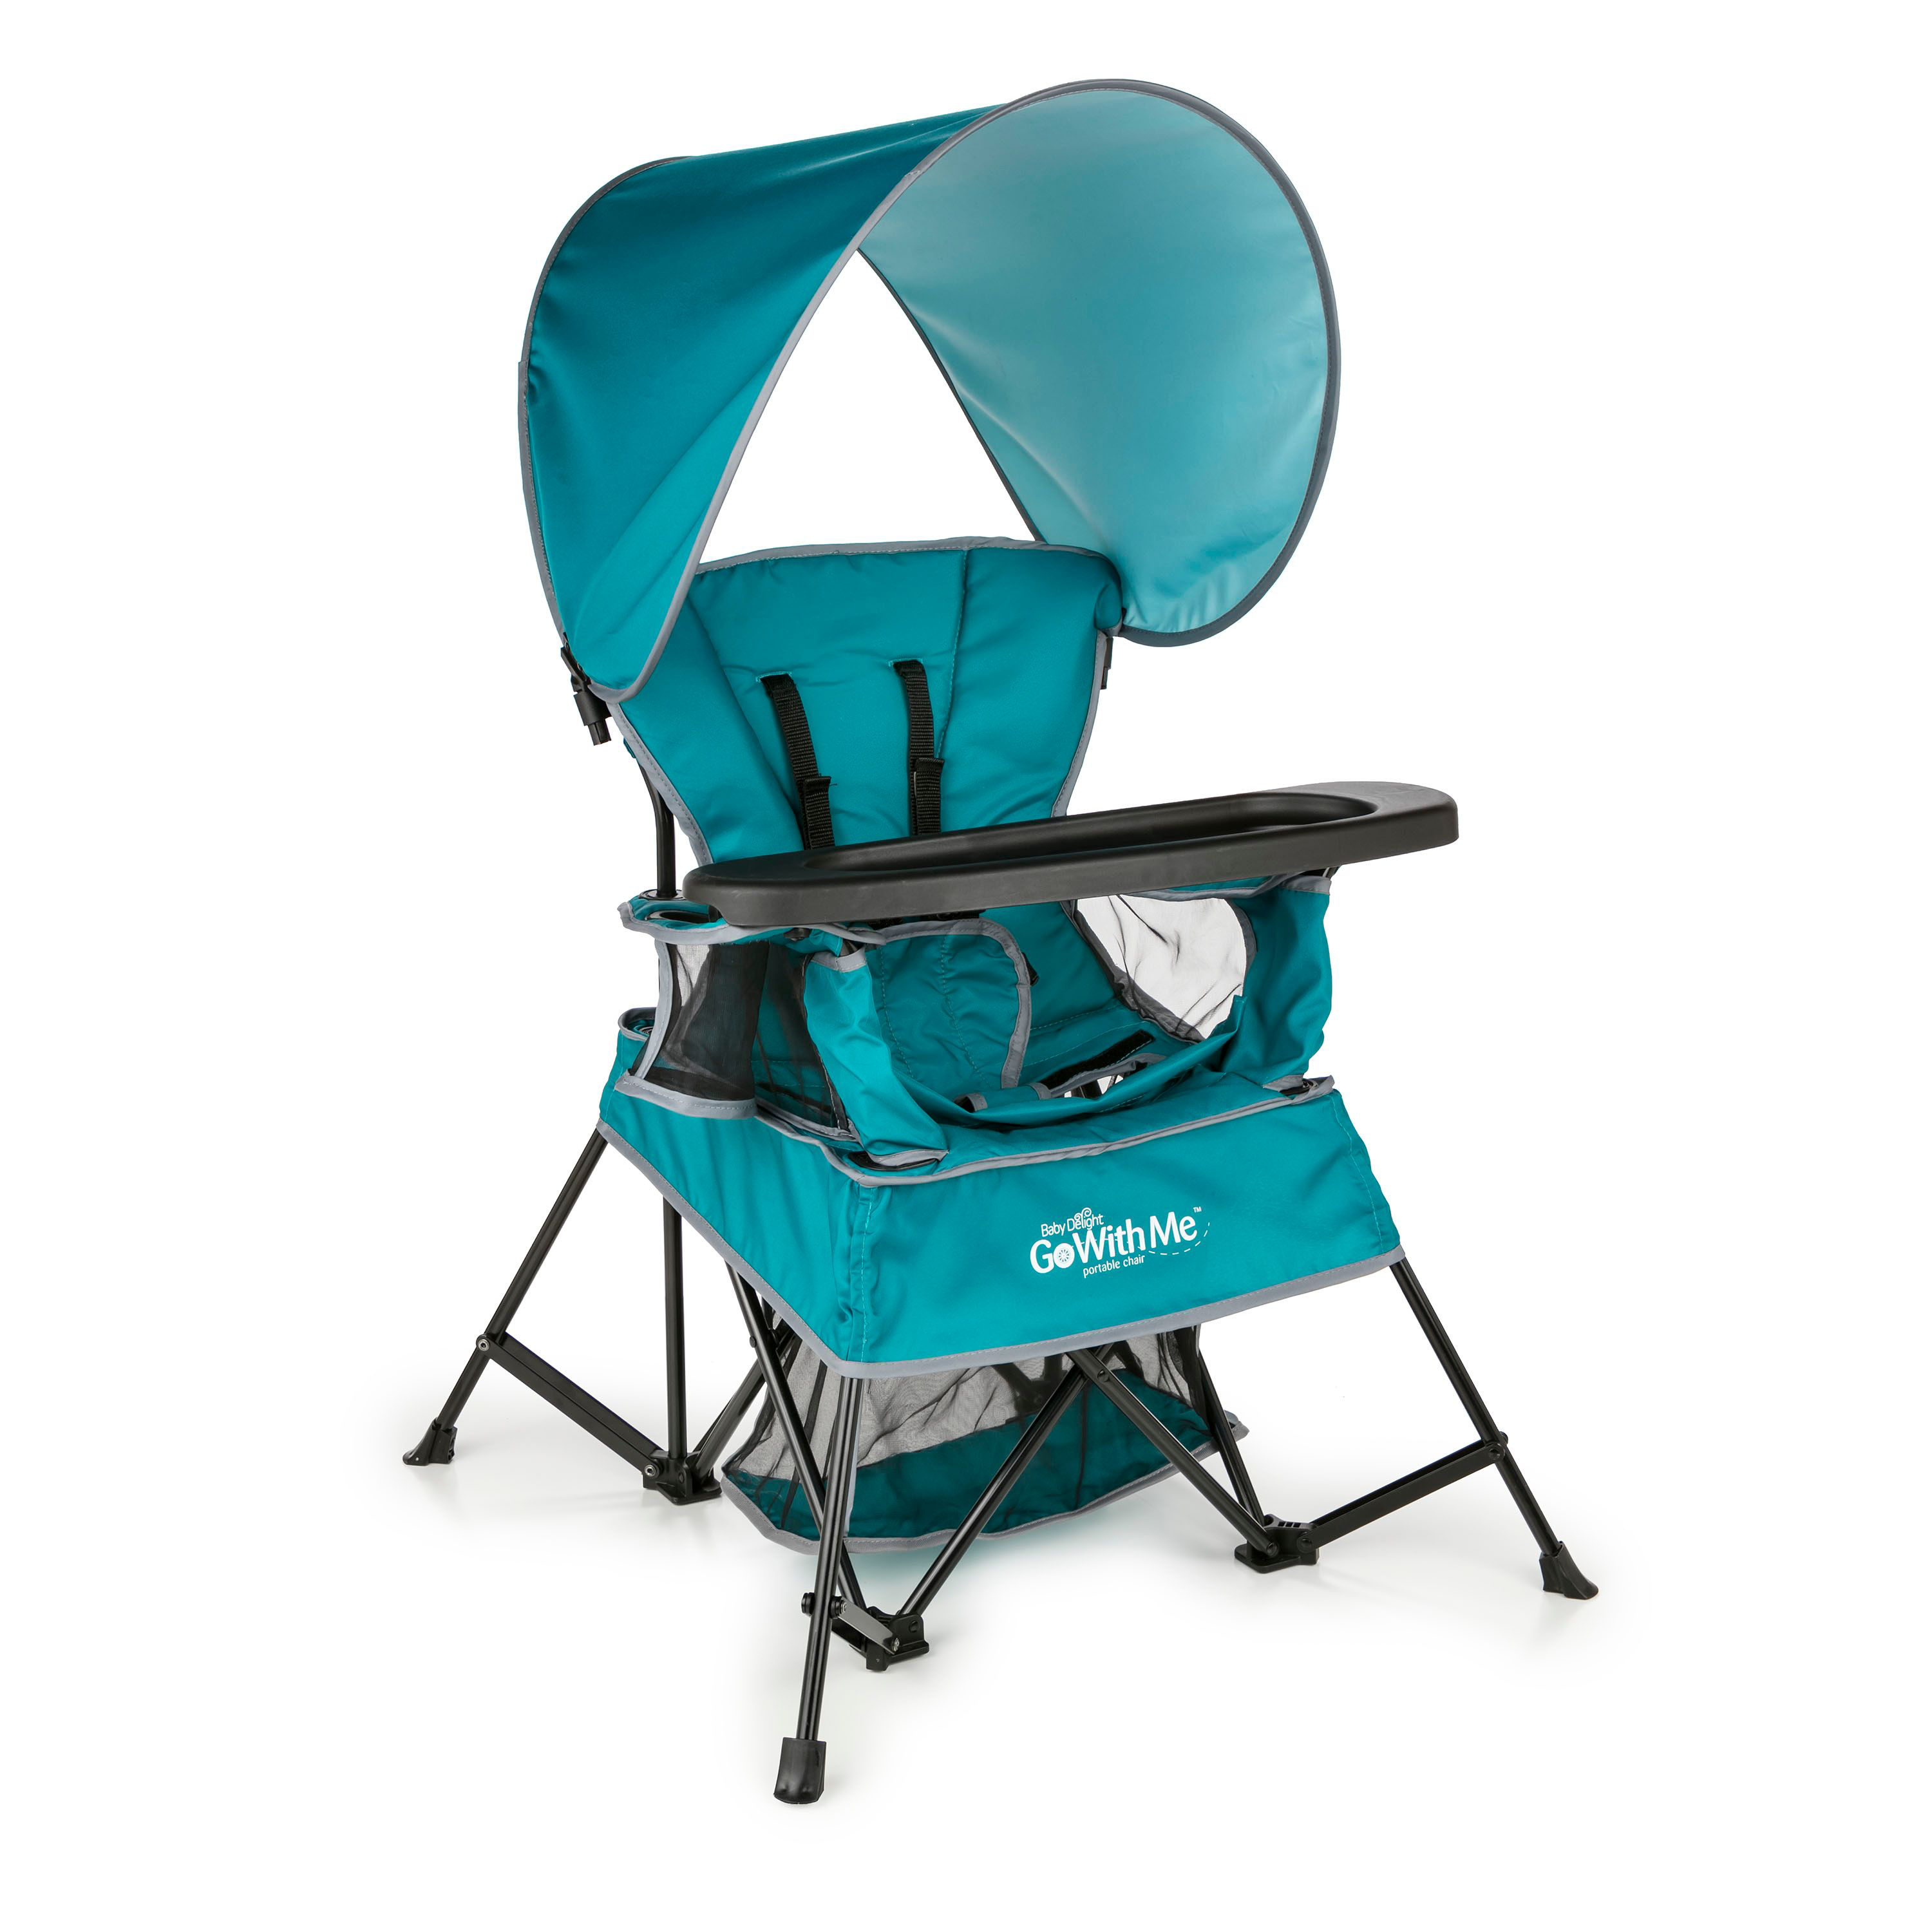 Baby Delight Go With Me Venture Deluxe Portable Chair for Kids - Teal